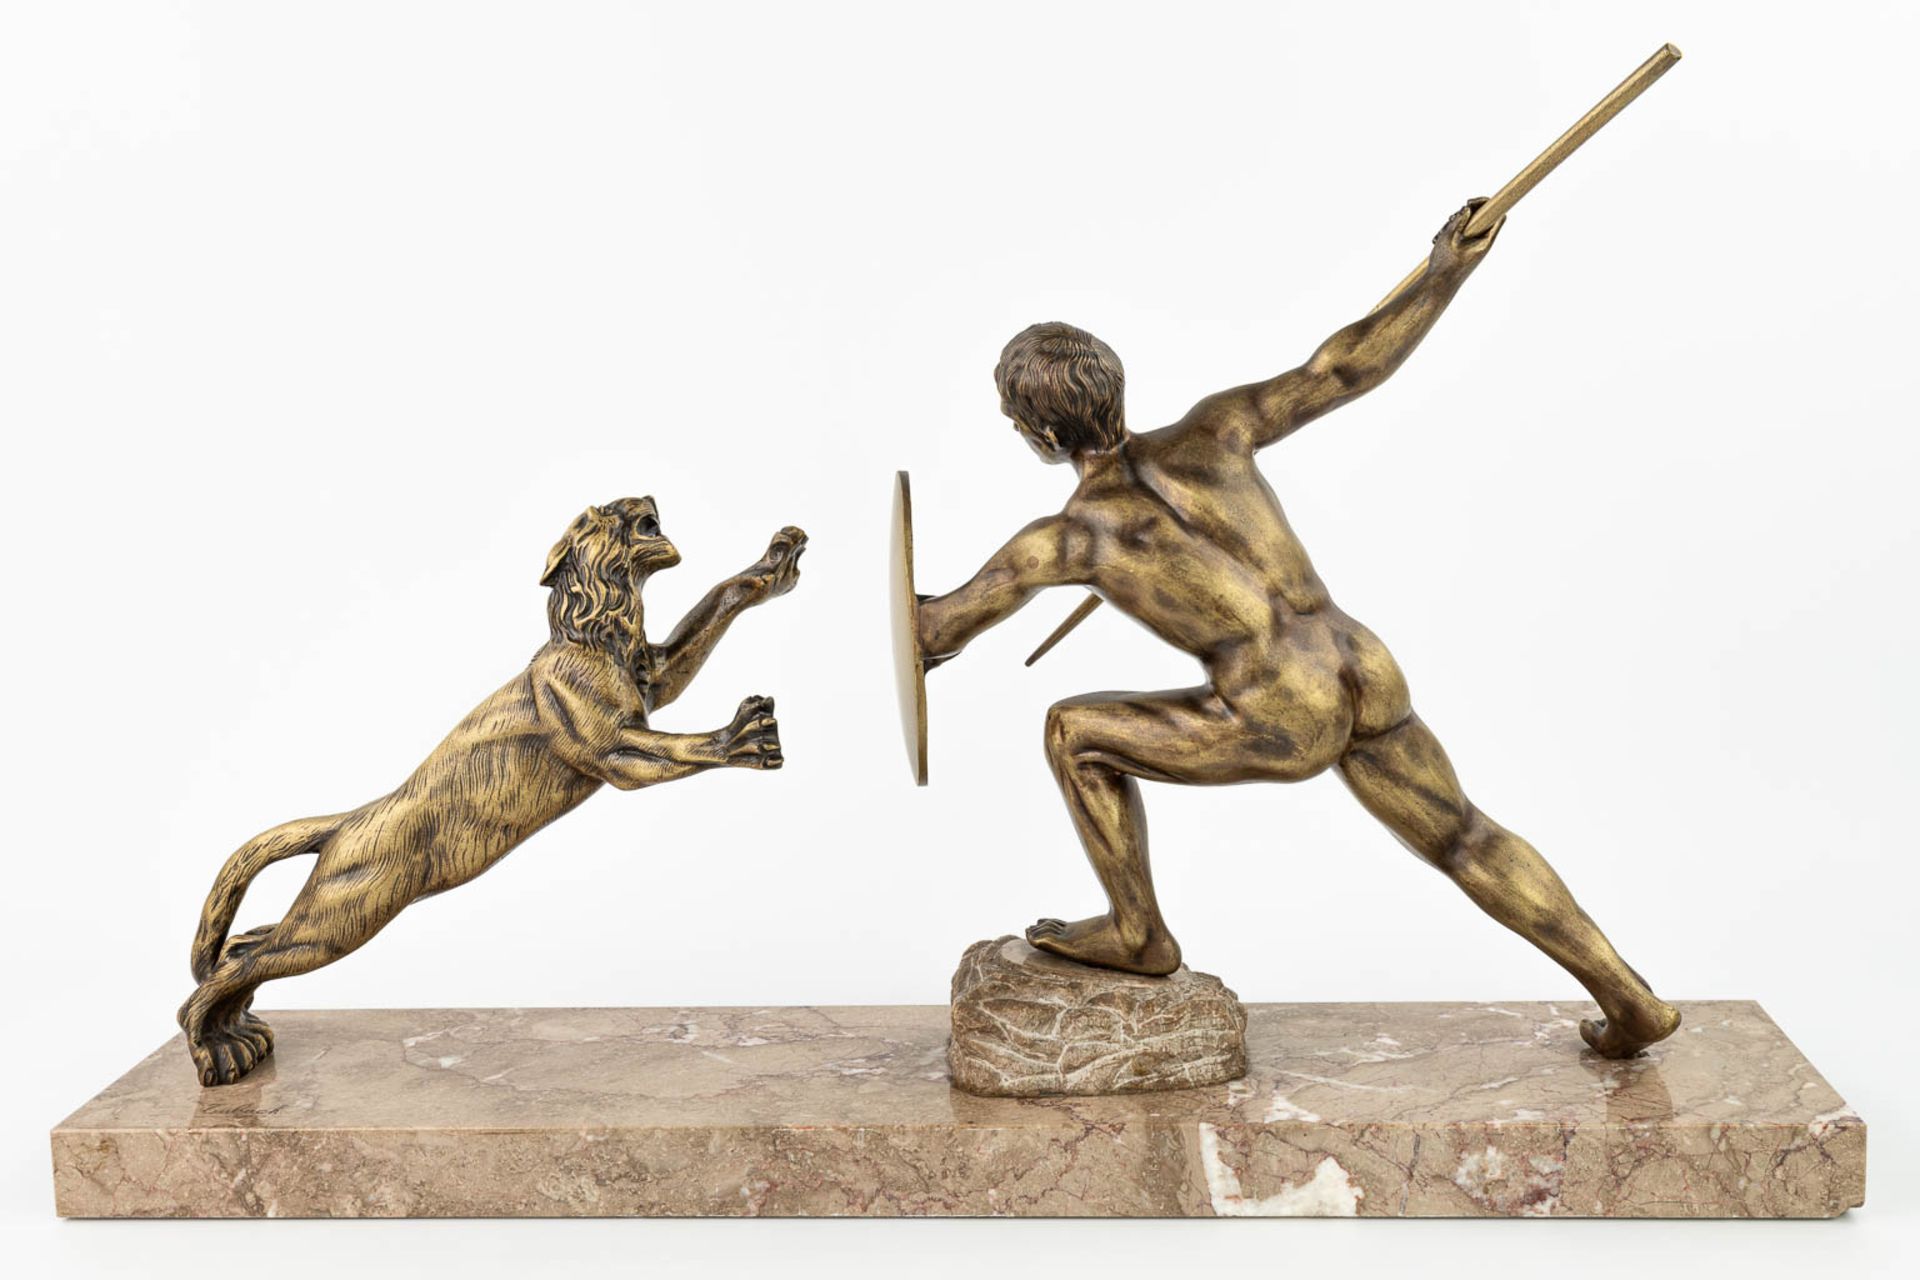 R. TUBACK (XIX-XX) 'Hunter with lion' an art deco statue made of bronze and mounted on a marble base - Image 6 of 11